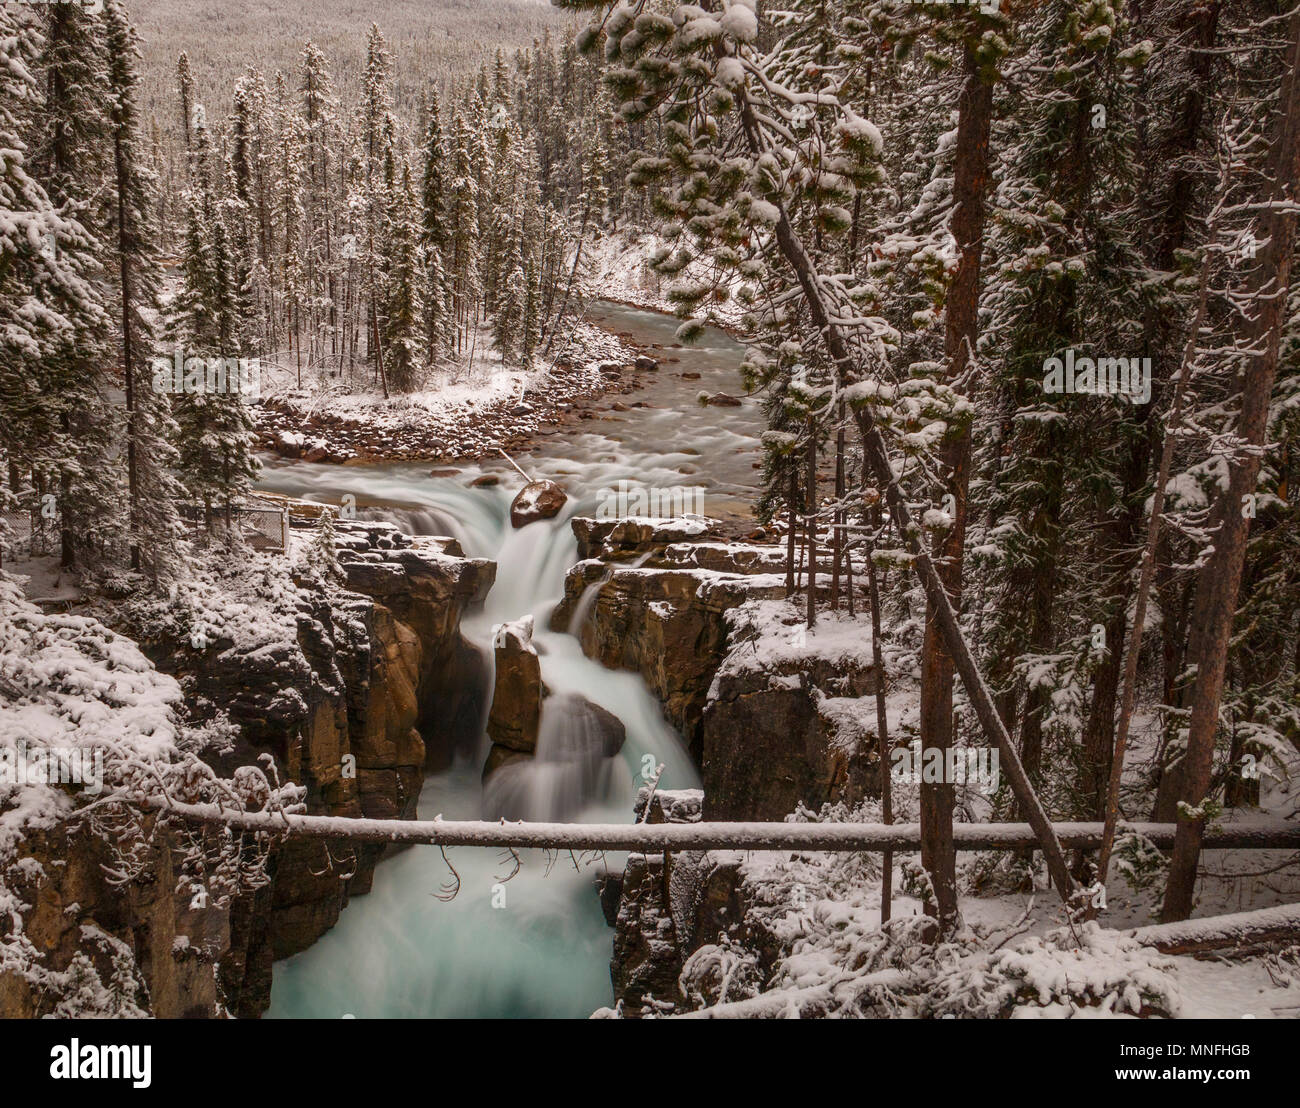 Sunwapta falls in Jasper National Park in October with fresh snow, beautiful long exposure using ND filter giving a creamy look to the water. Stock Photo